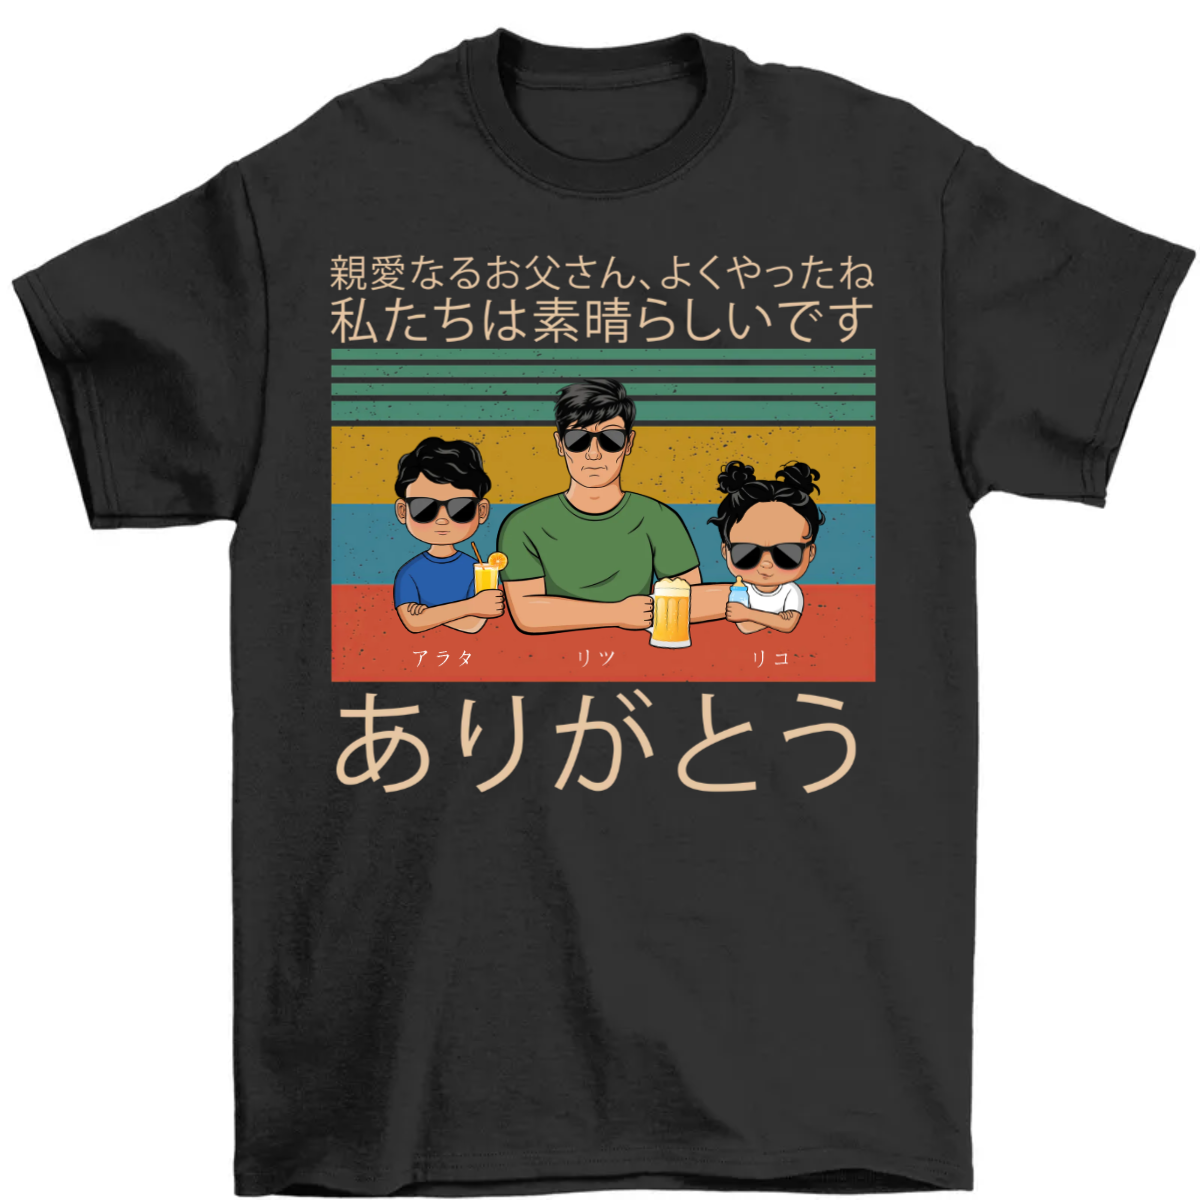 Dear Dad Great Job We're Awesome Thank You - Japan Father's Gift - Personalized Custom T-Shirt